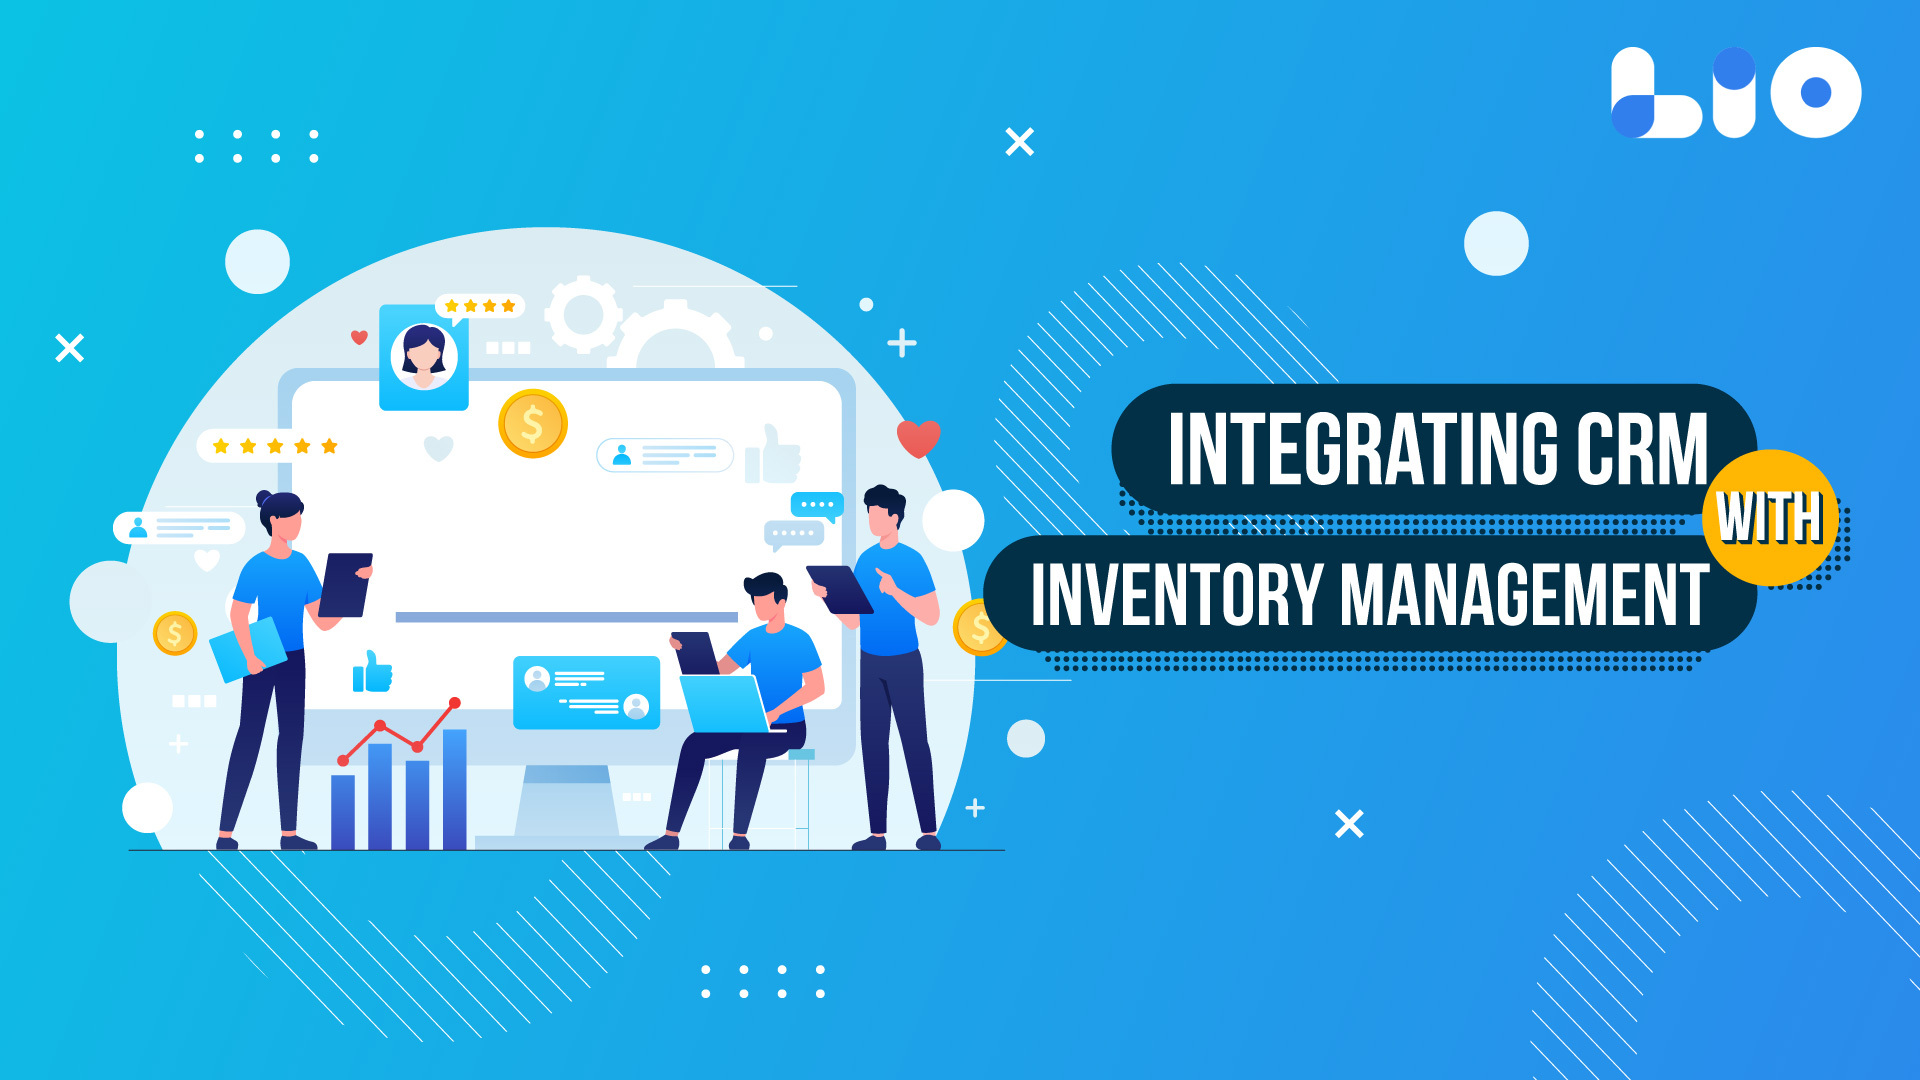 The Benefits of Integrating CRM with Inventory Management